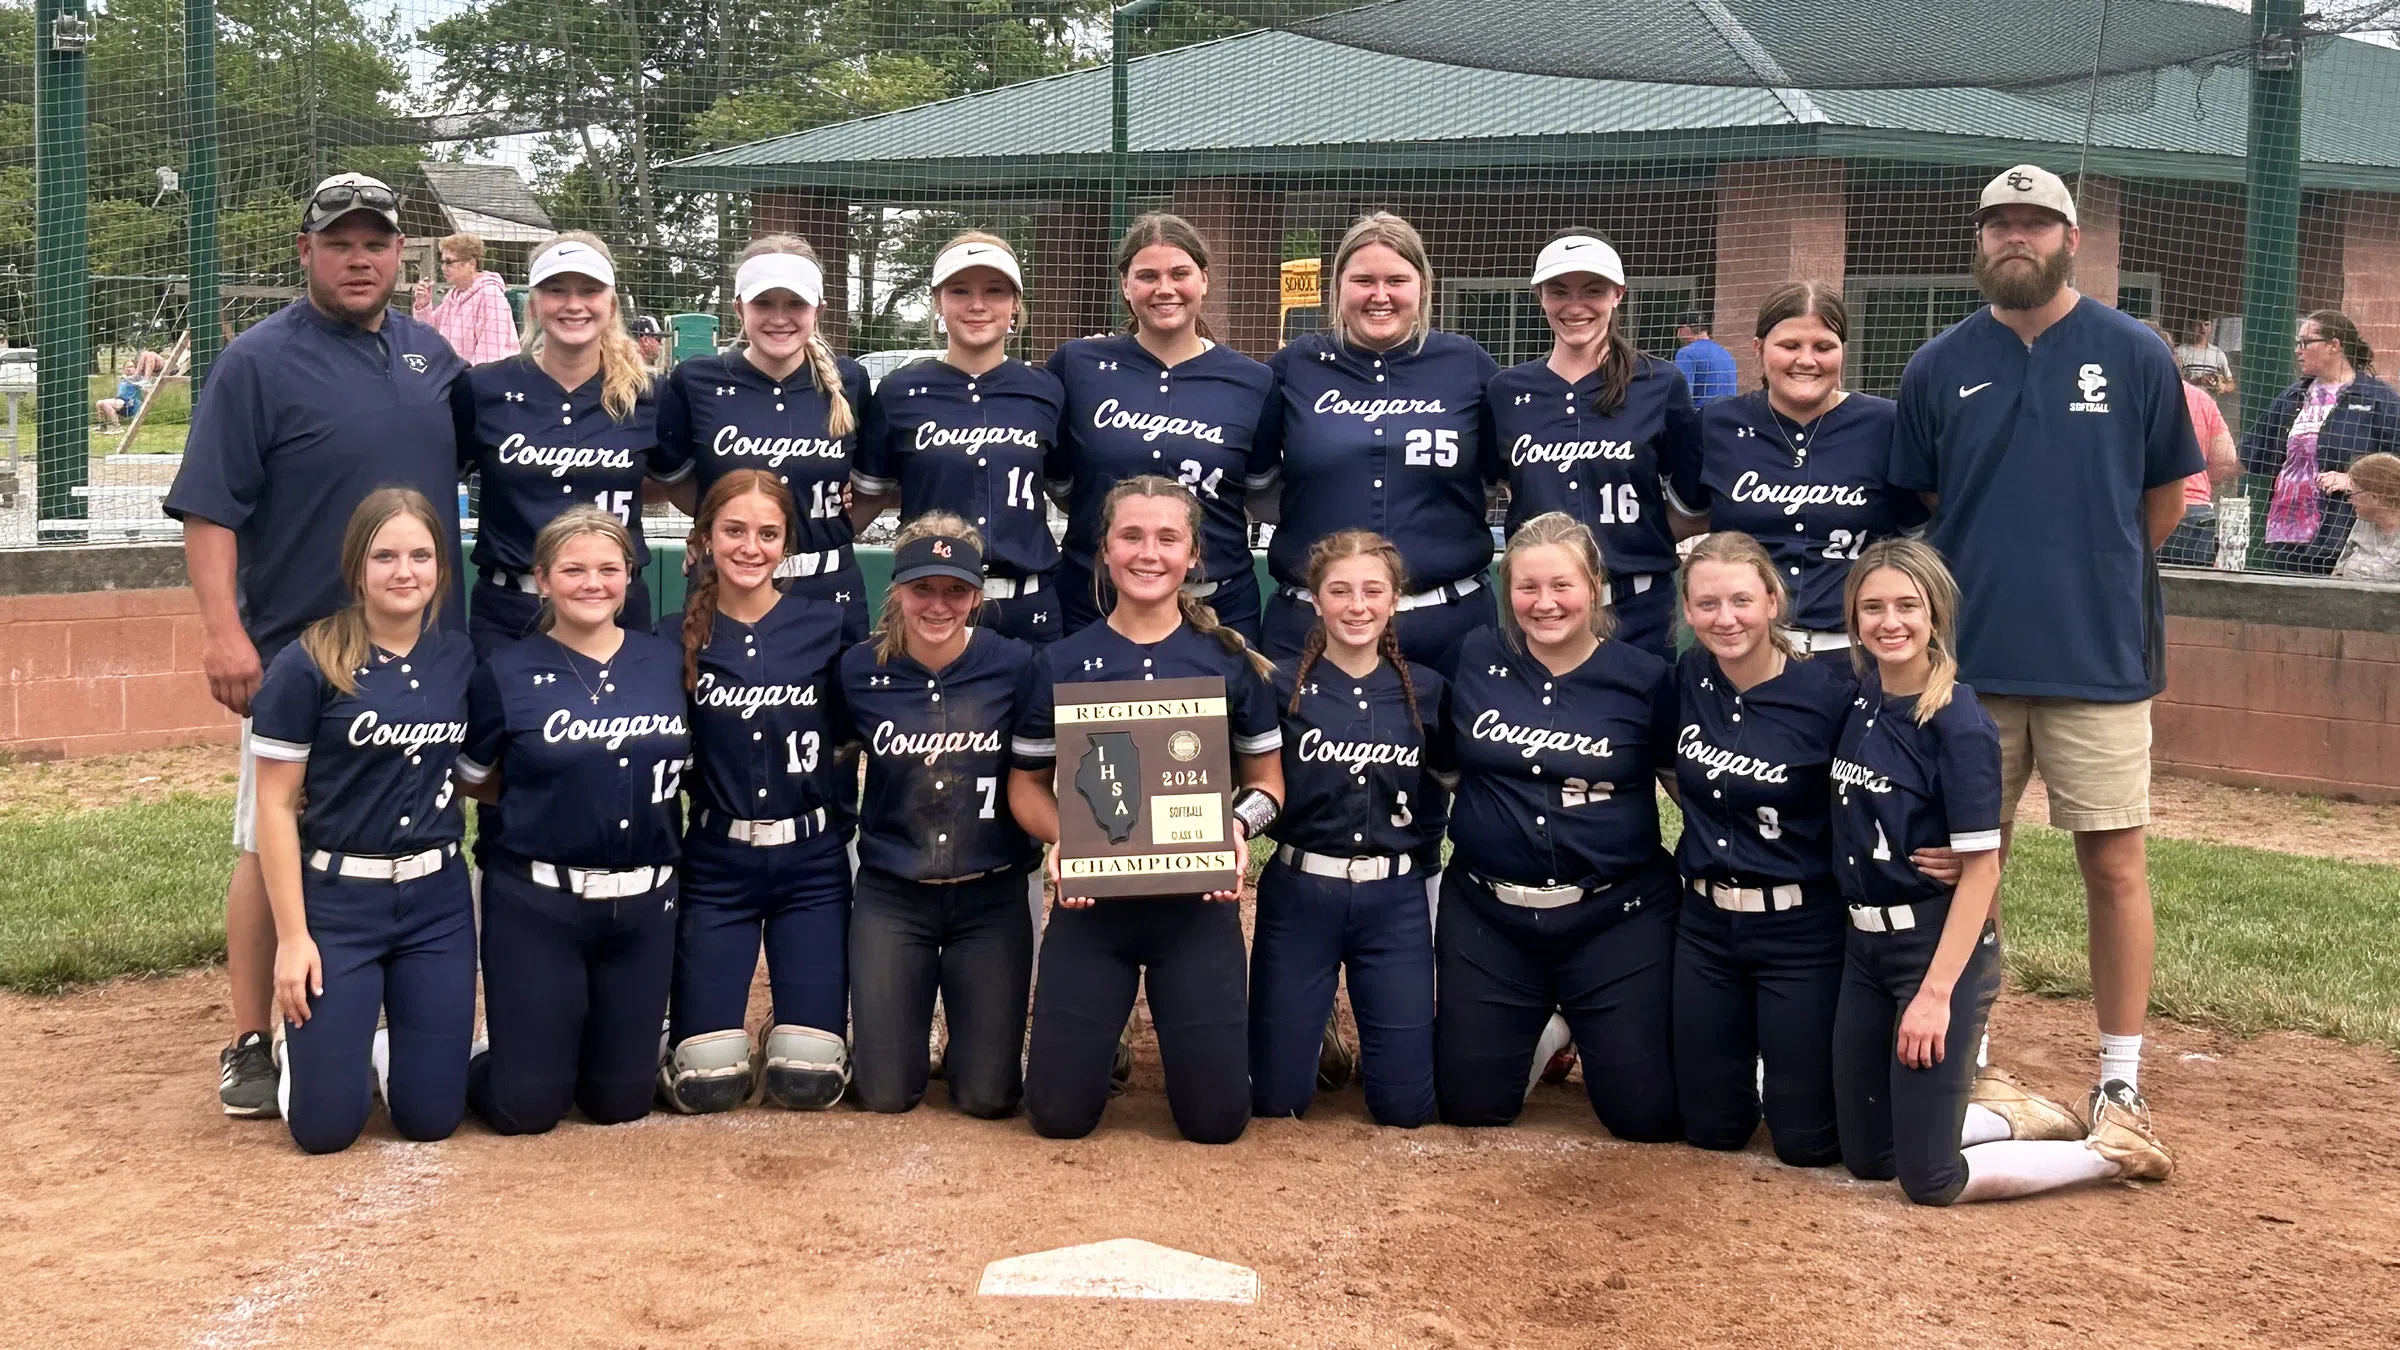 South Central Wins Third Straight Regional Championship With 18-Hit Effort and Webster No-Hitter